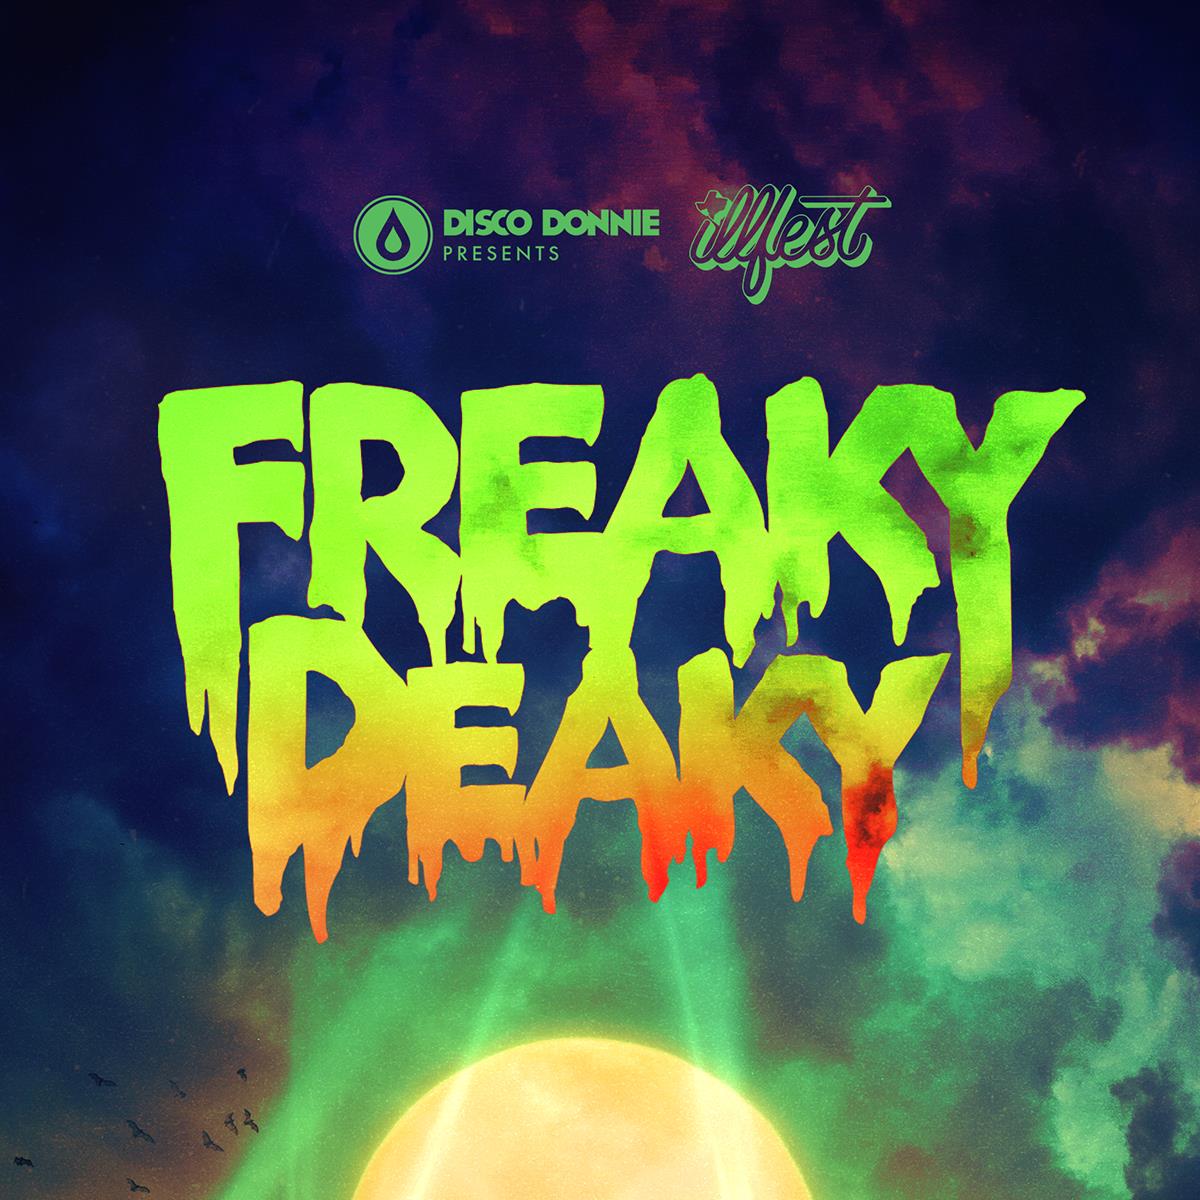 Buy Tickets to Freaky Deaky 2023 in Austin on Oct 28, 2023 Oct 29,2023